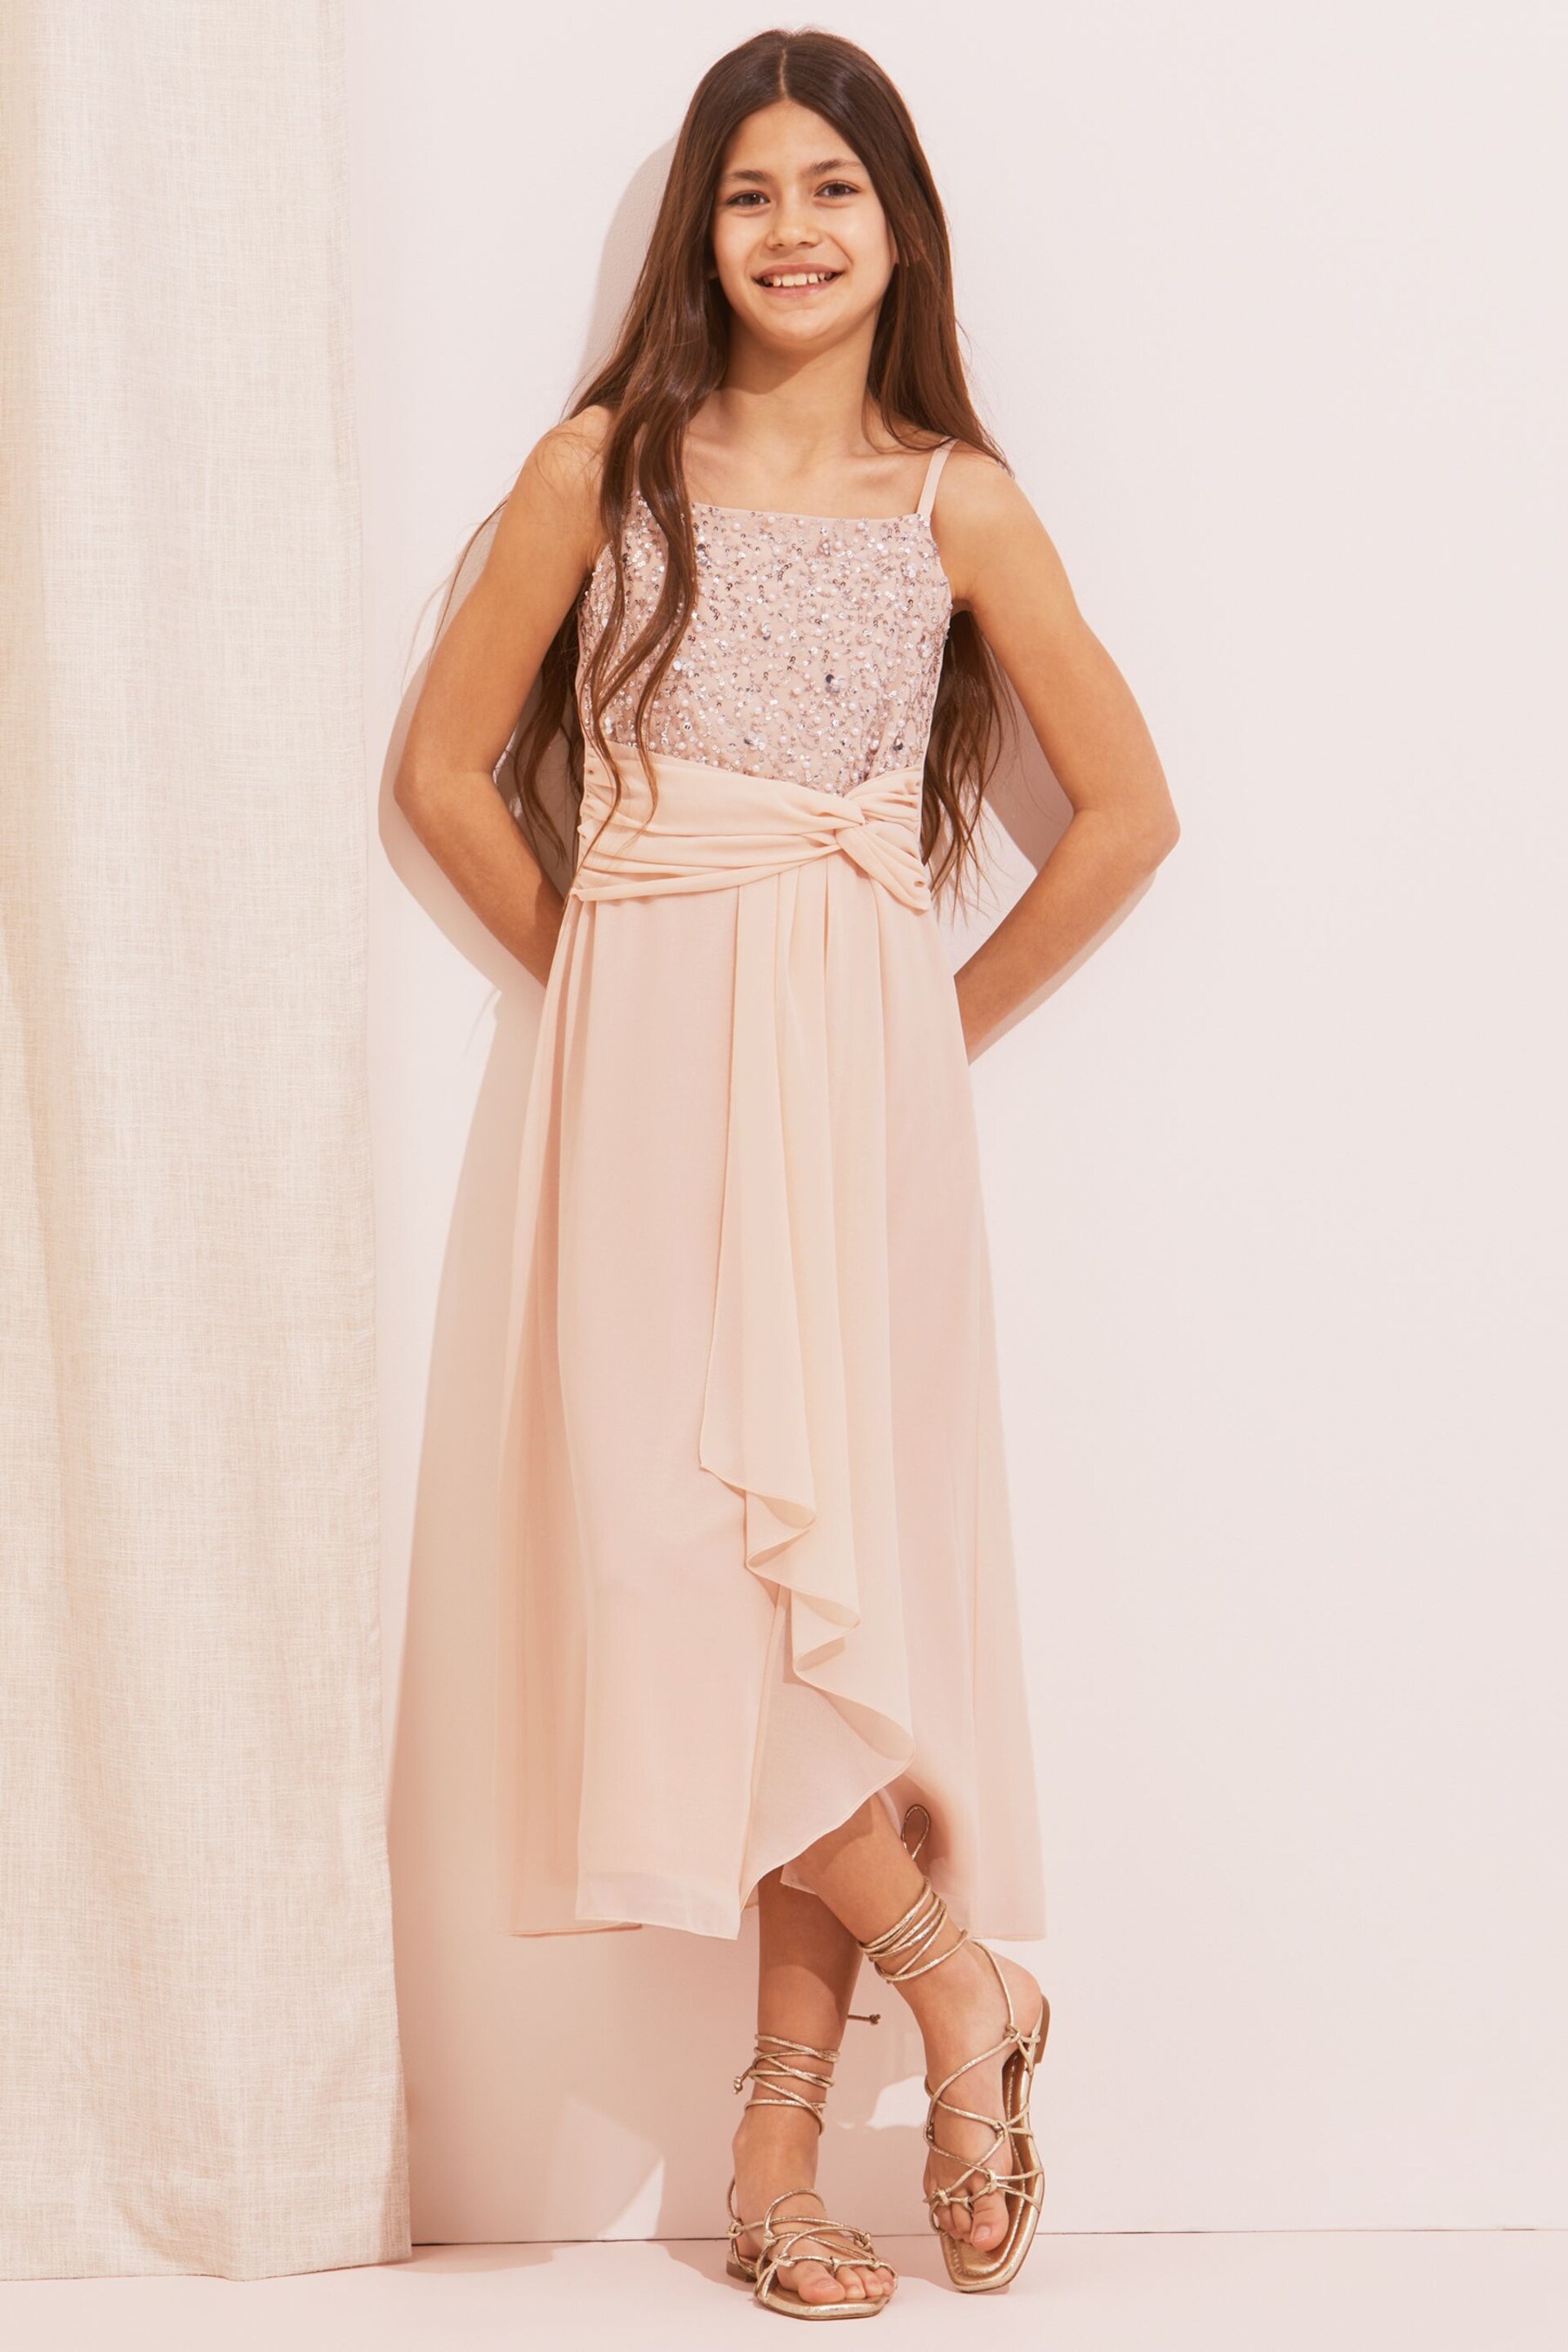 Lipsy Pink Embellished Strap Maxi Occasion Dress - Image 1 of 4